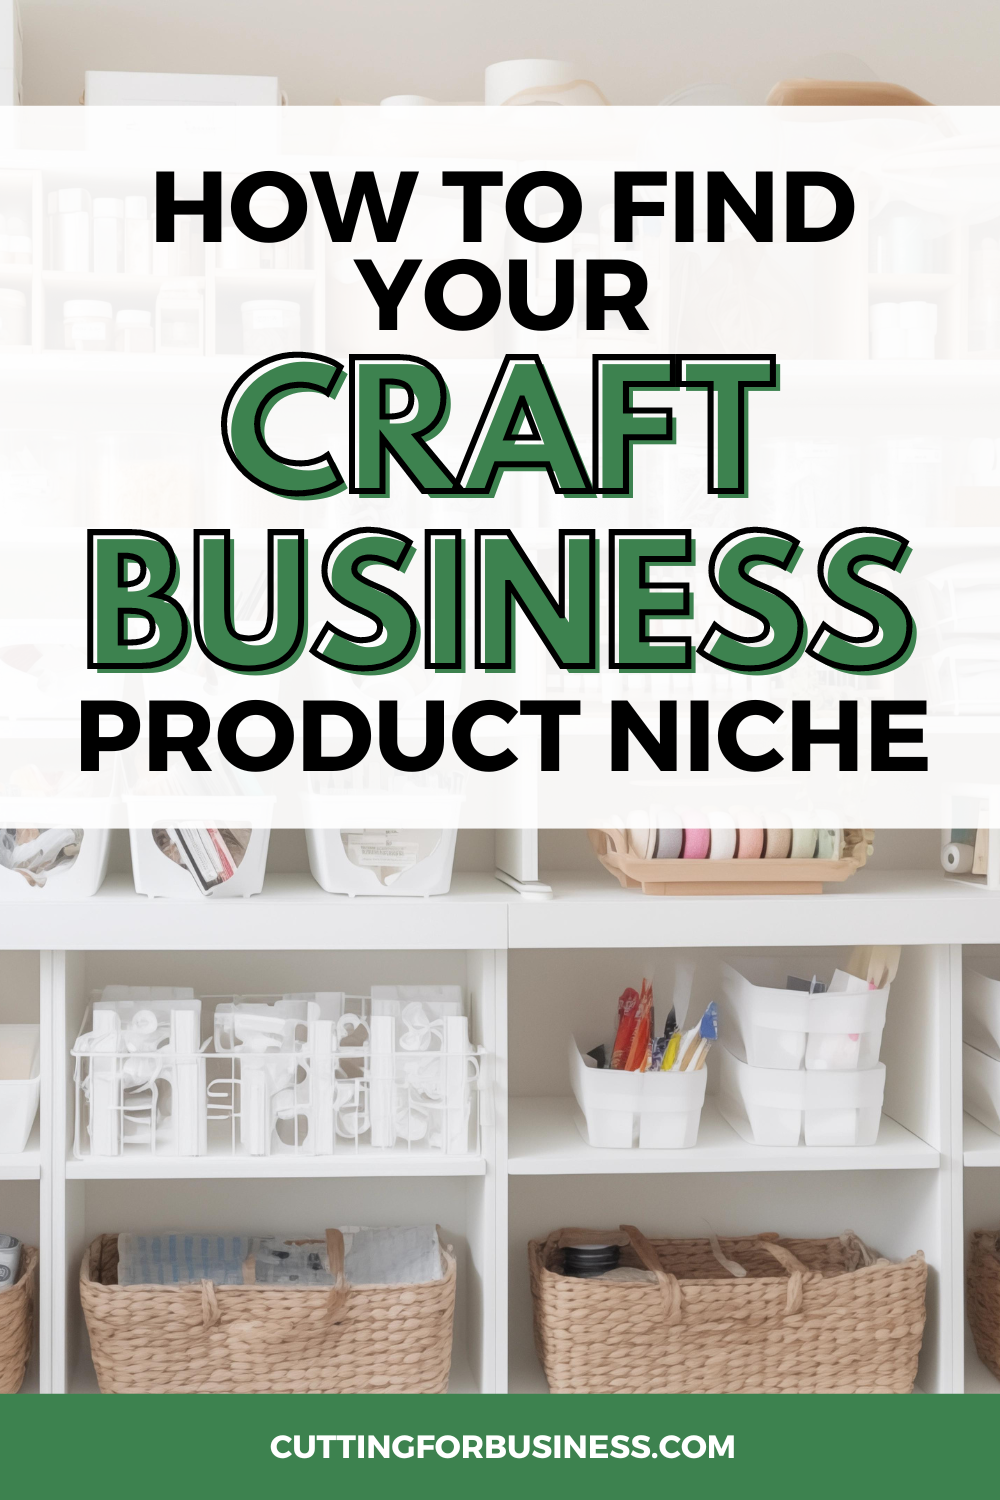 How to Find Your Craft Business Product Niche - cuttingforbusiness.com